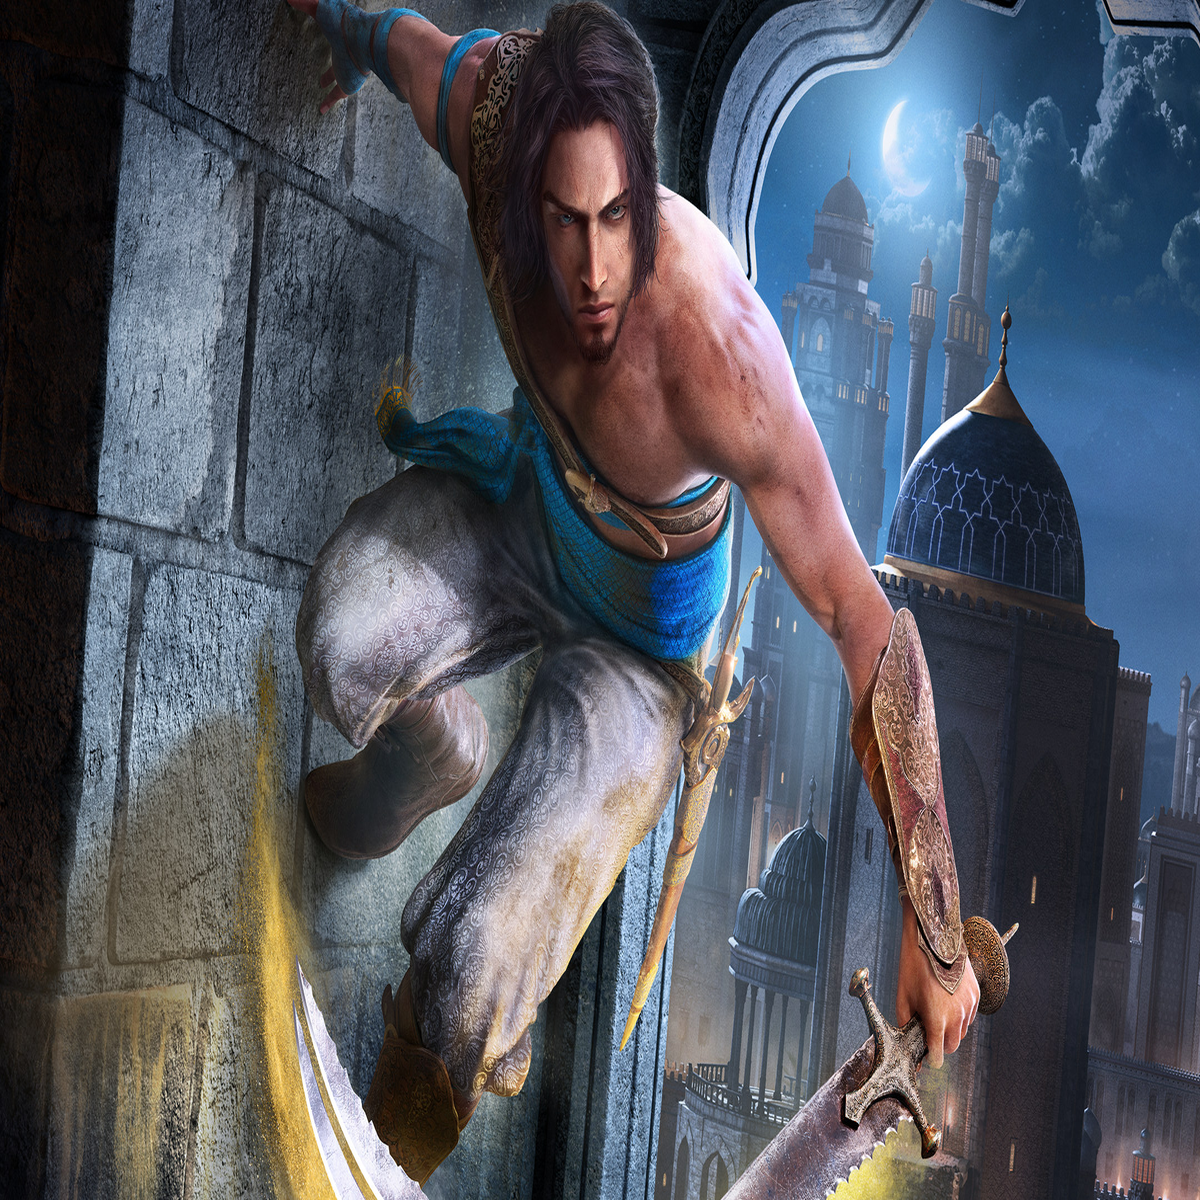 Watch Prince of Persia: The Sands of Time